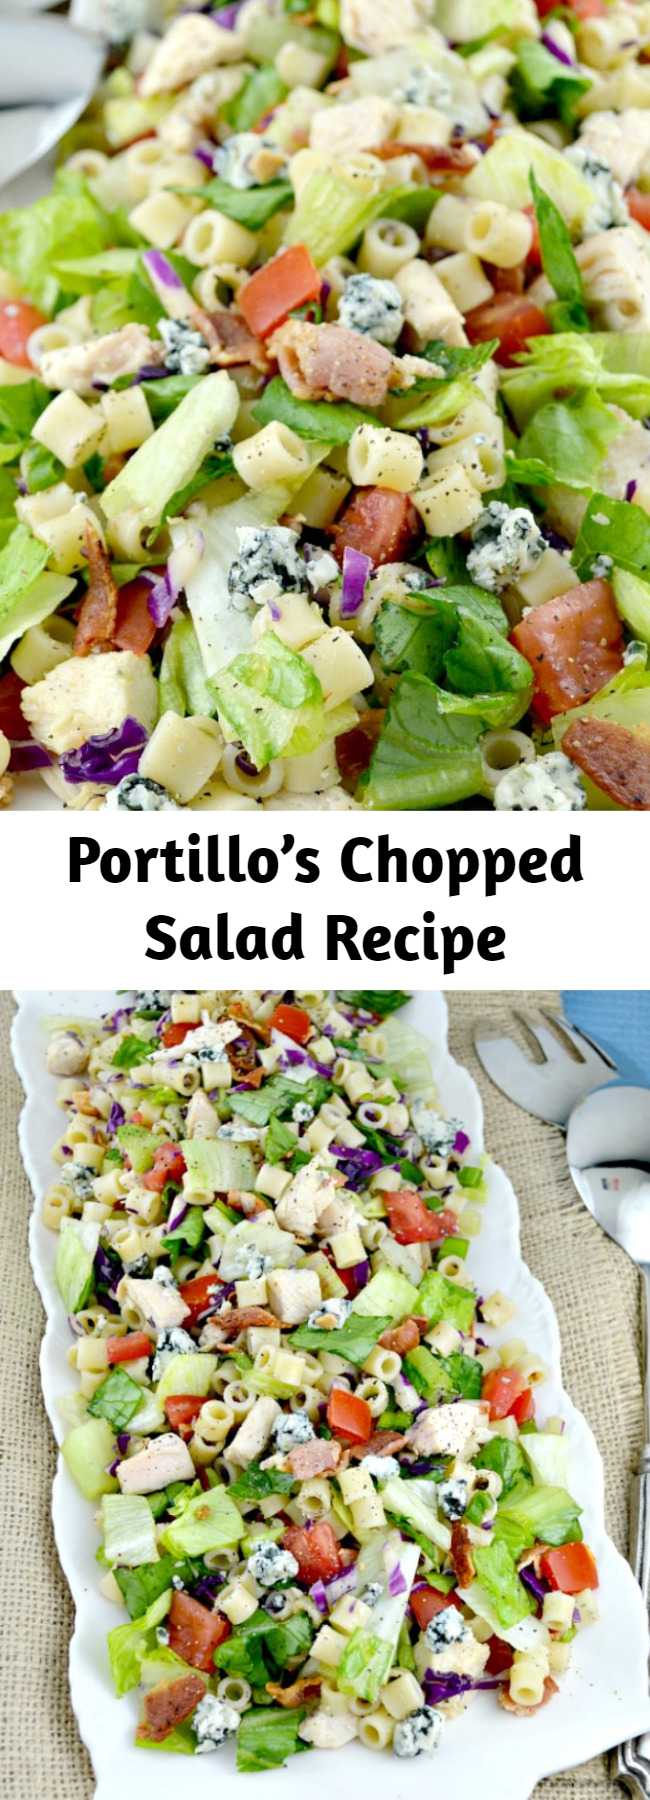 Portillo’s Chopped Salad Recipe - Portillo's Chopped Salad is a copycat recipe like the restaurant version. Loaded with great chicken, pasta, bacon, and blue cheese then dressed in a sweet Italian dressing!